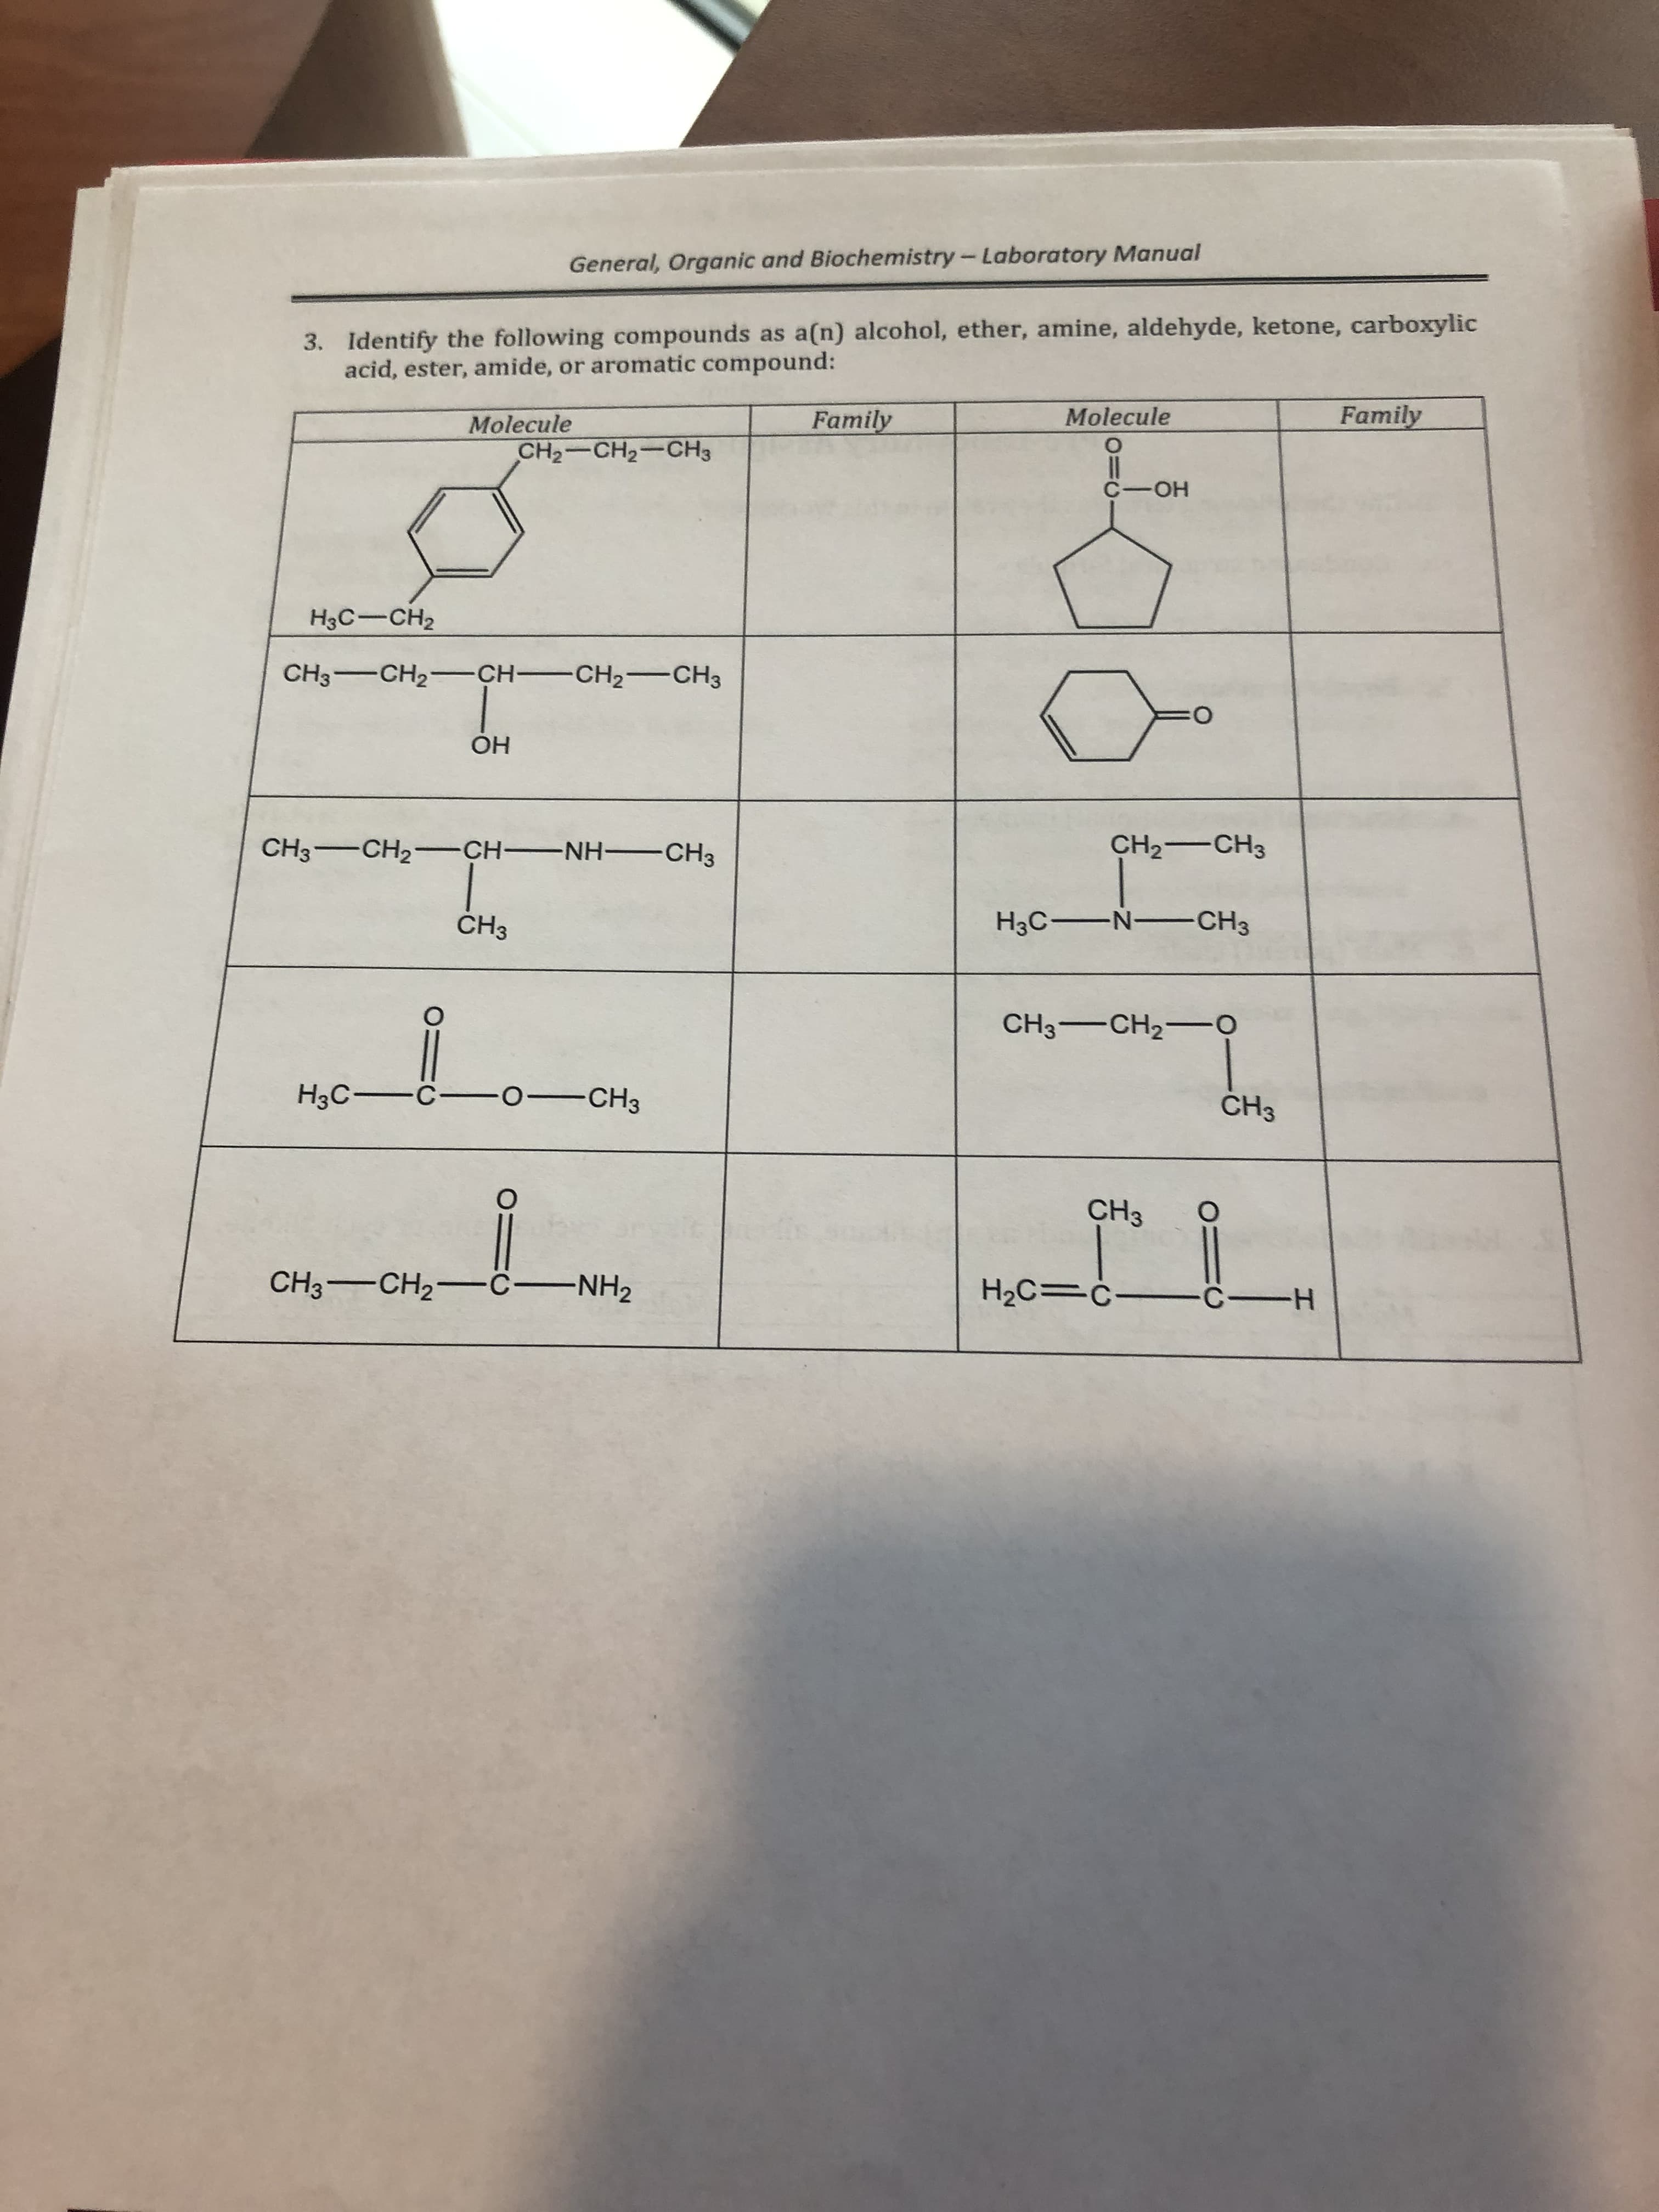 General, Organic and Biochemistry- Laboratory Manual
3. Identify the folowingcompounds as a(e) alcohol, ether, amine, aldehyde, ketone, carboxylic
acid, ester, amide, or aromatic compound:
Famil
Molecule
Famil
oleueH-CH3
CH2-CH2
CH3
C OH
H3C-CH2
он
CH2_-CH3
CH3
CH3
CH3 O
CH3CH2CNH2
